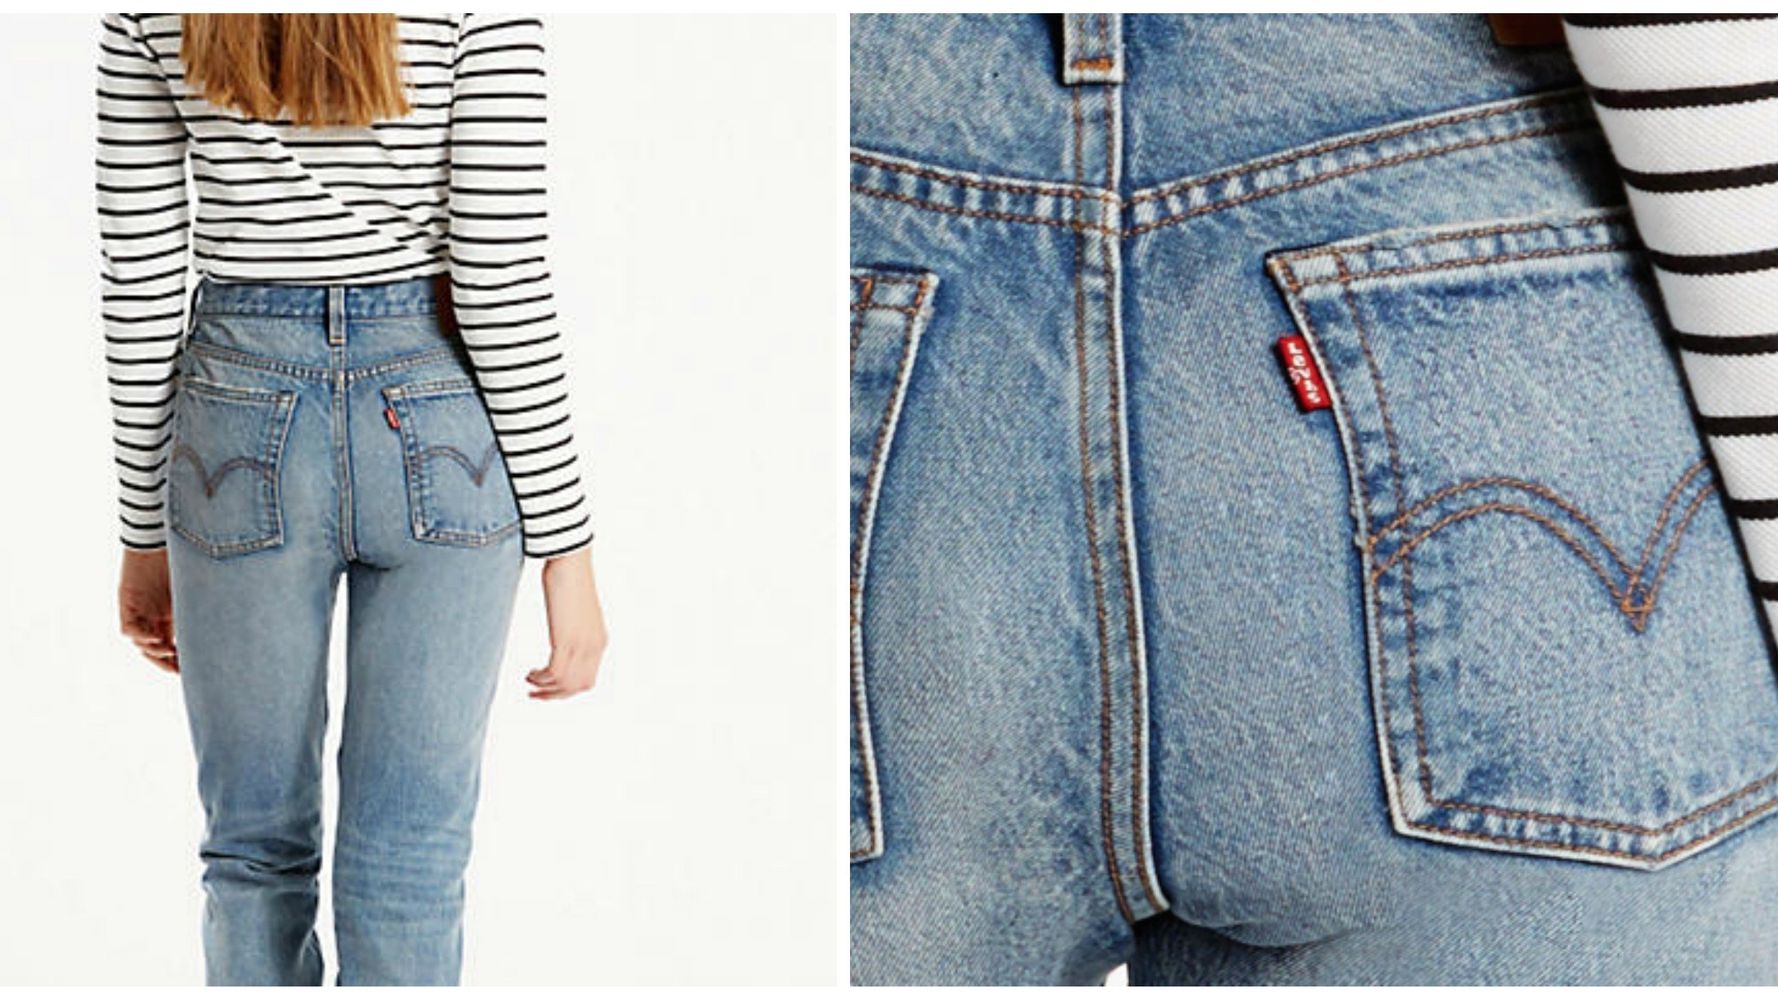 Levi's New 'Wedgie Fit' Jeans Promise To Lift Your Butt Like The Real Thing  | HuffPost Life